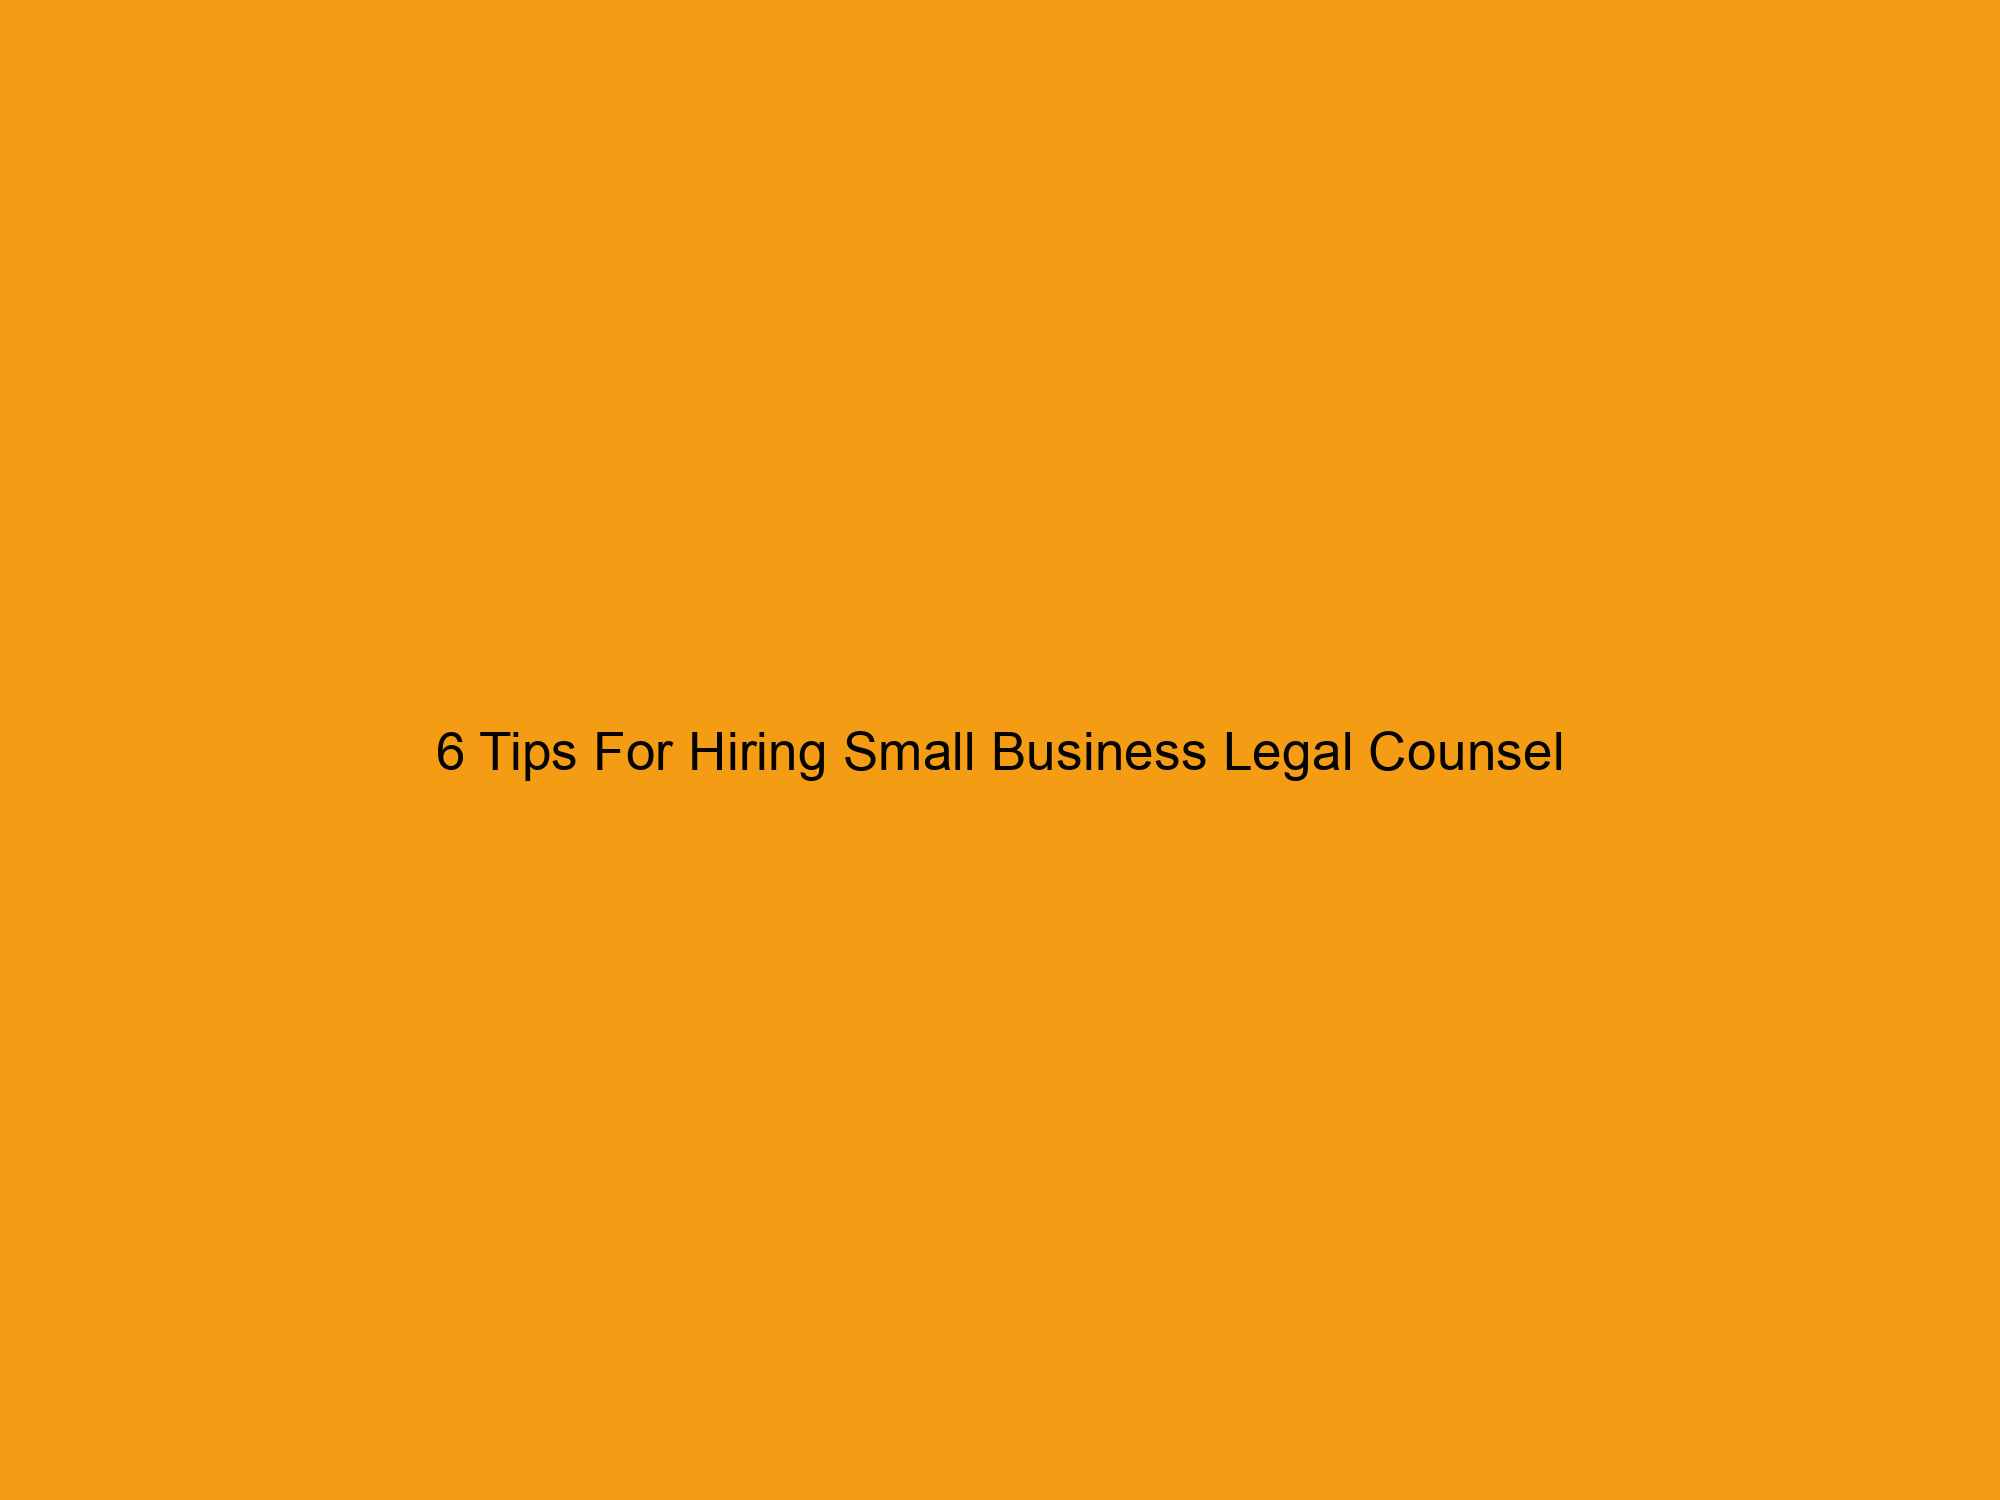 6 Tips For Hiring Small Business Legal Counsel